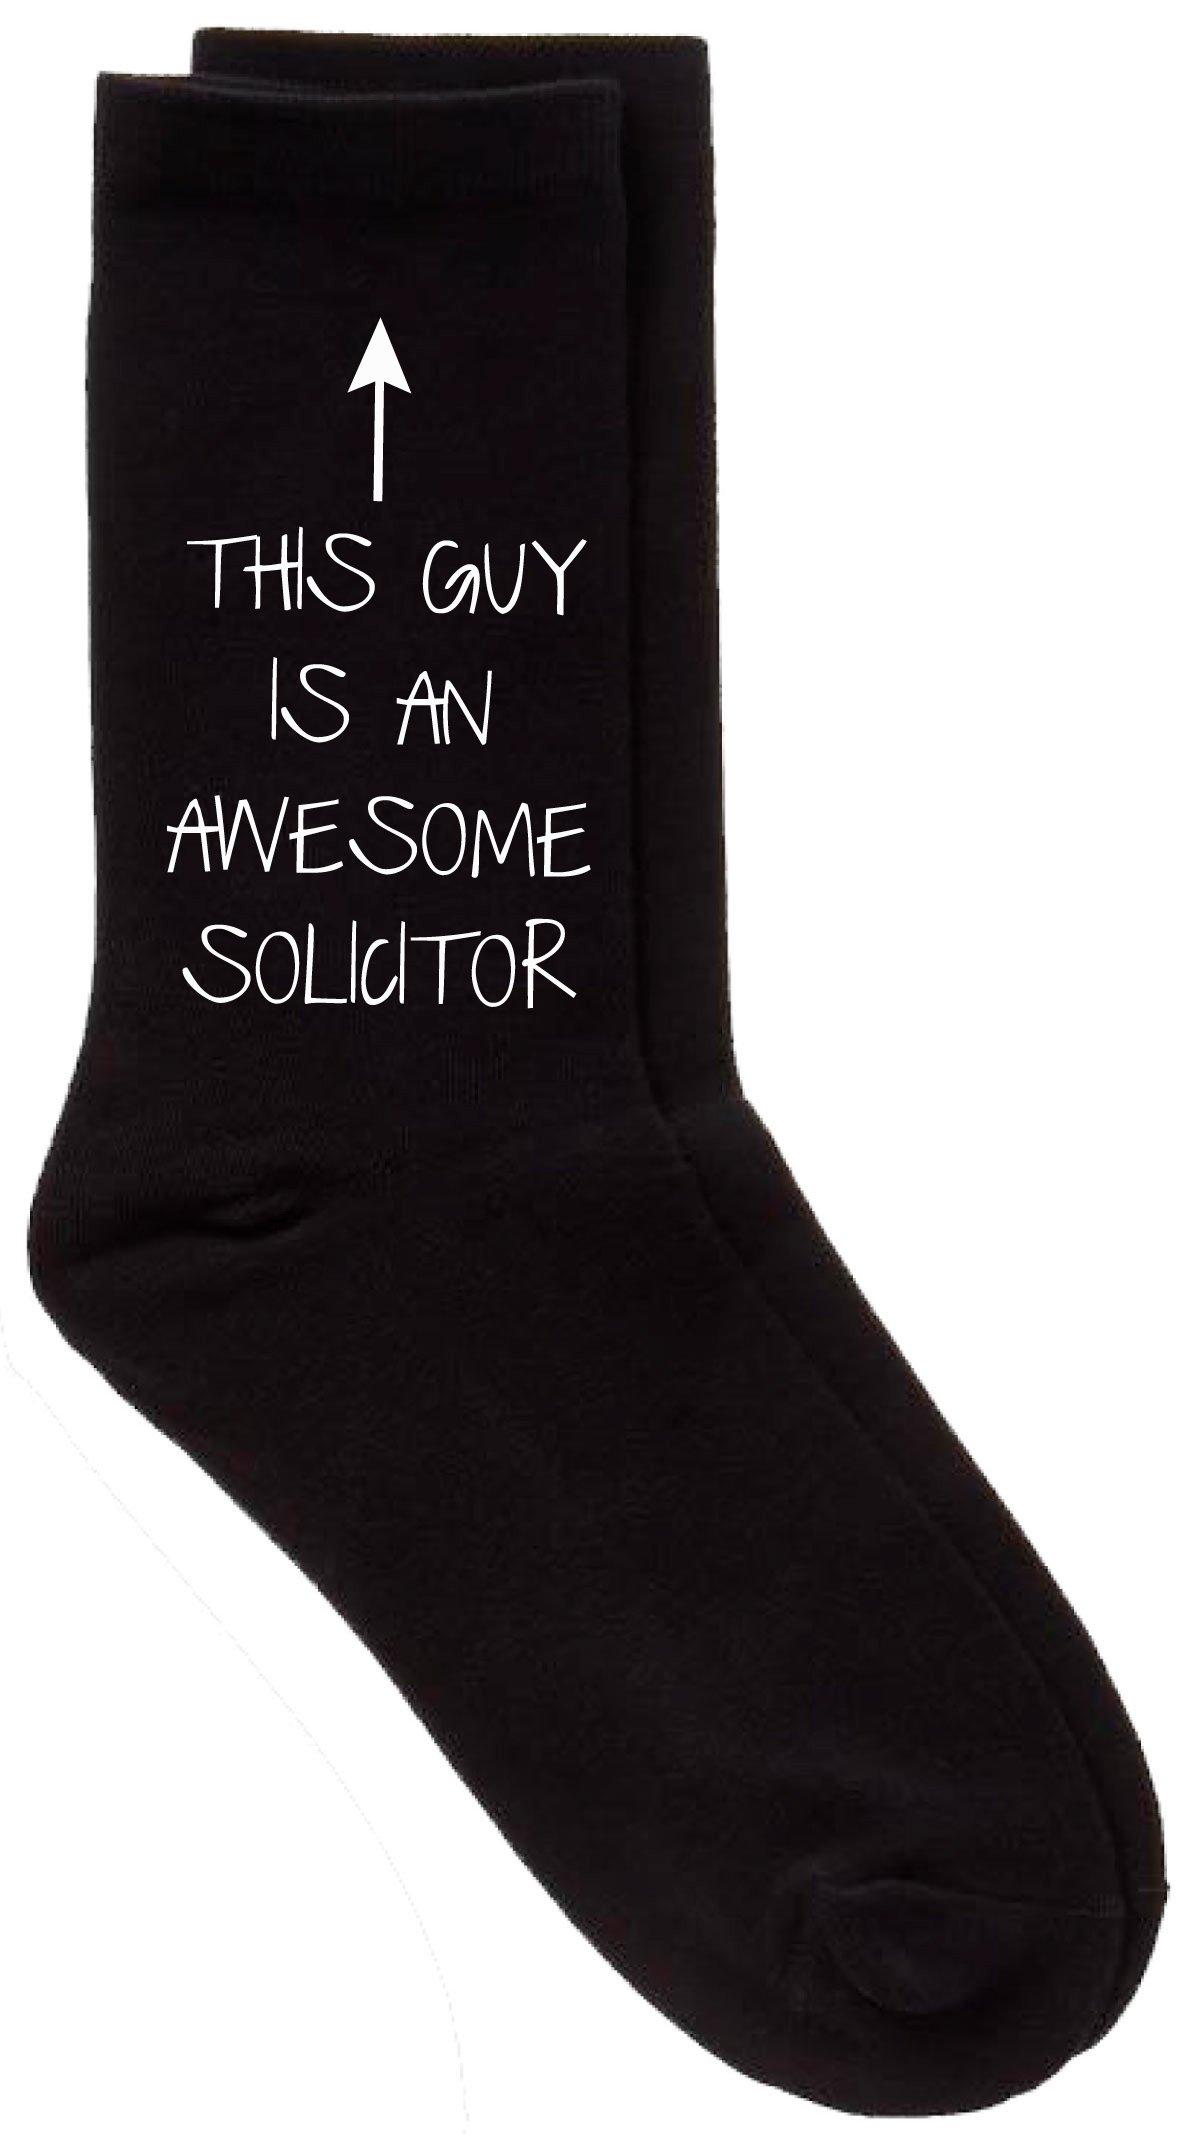 This Guy Is An Awesome Solicitor Mens Black Socks